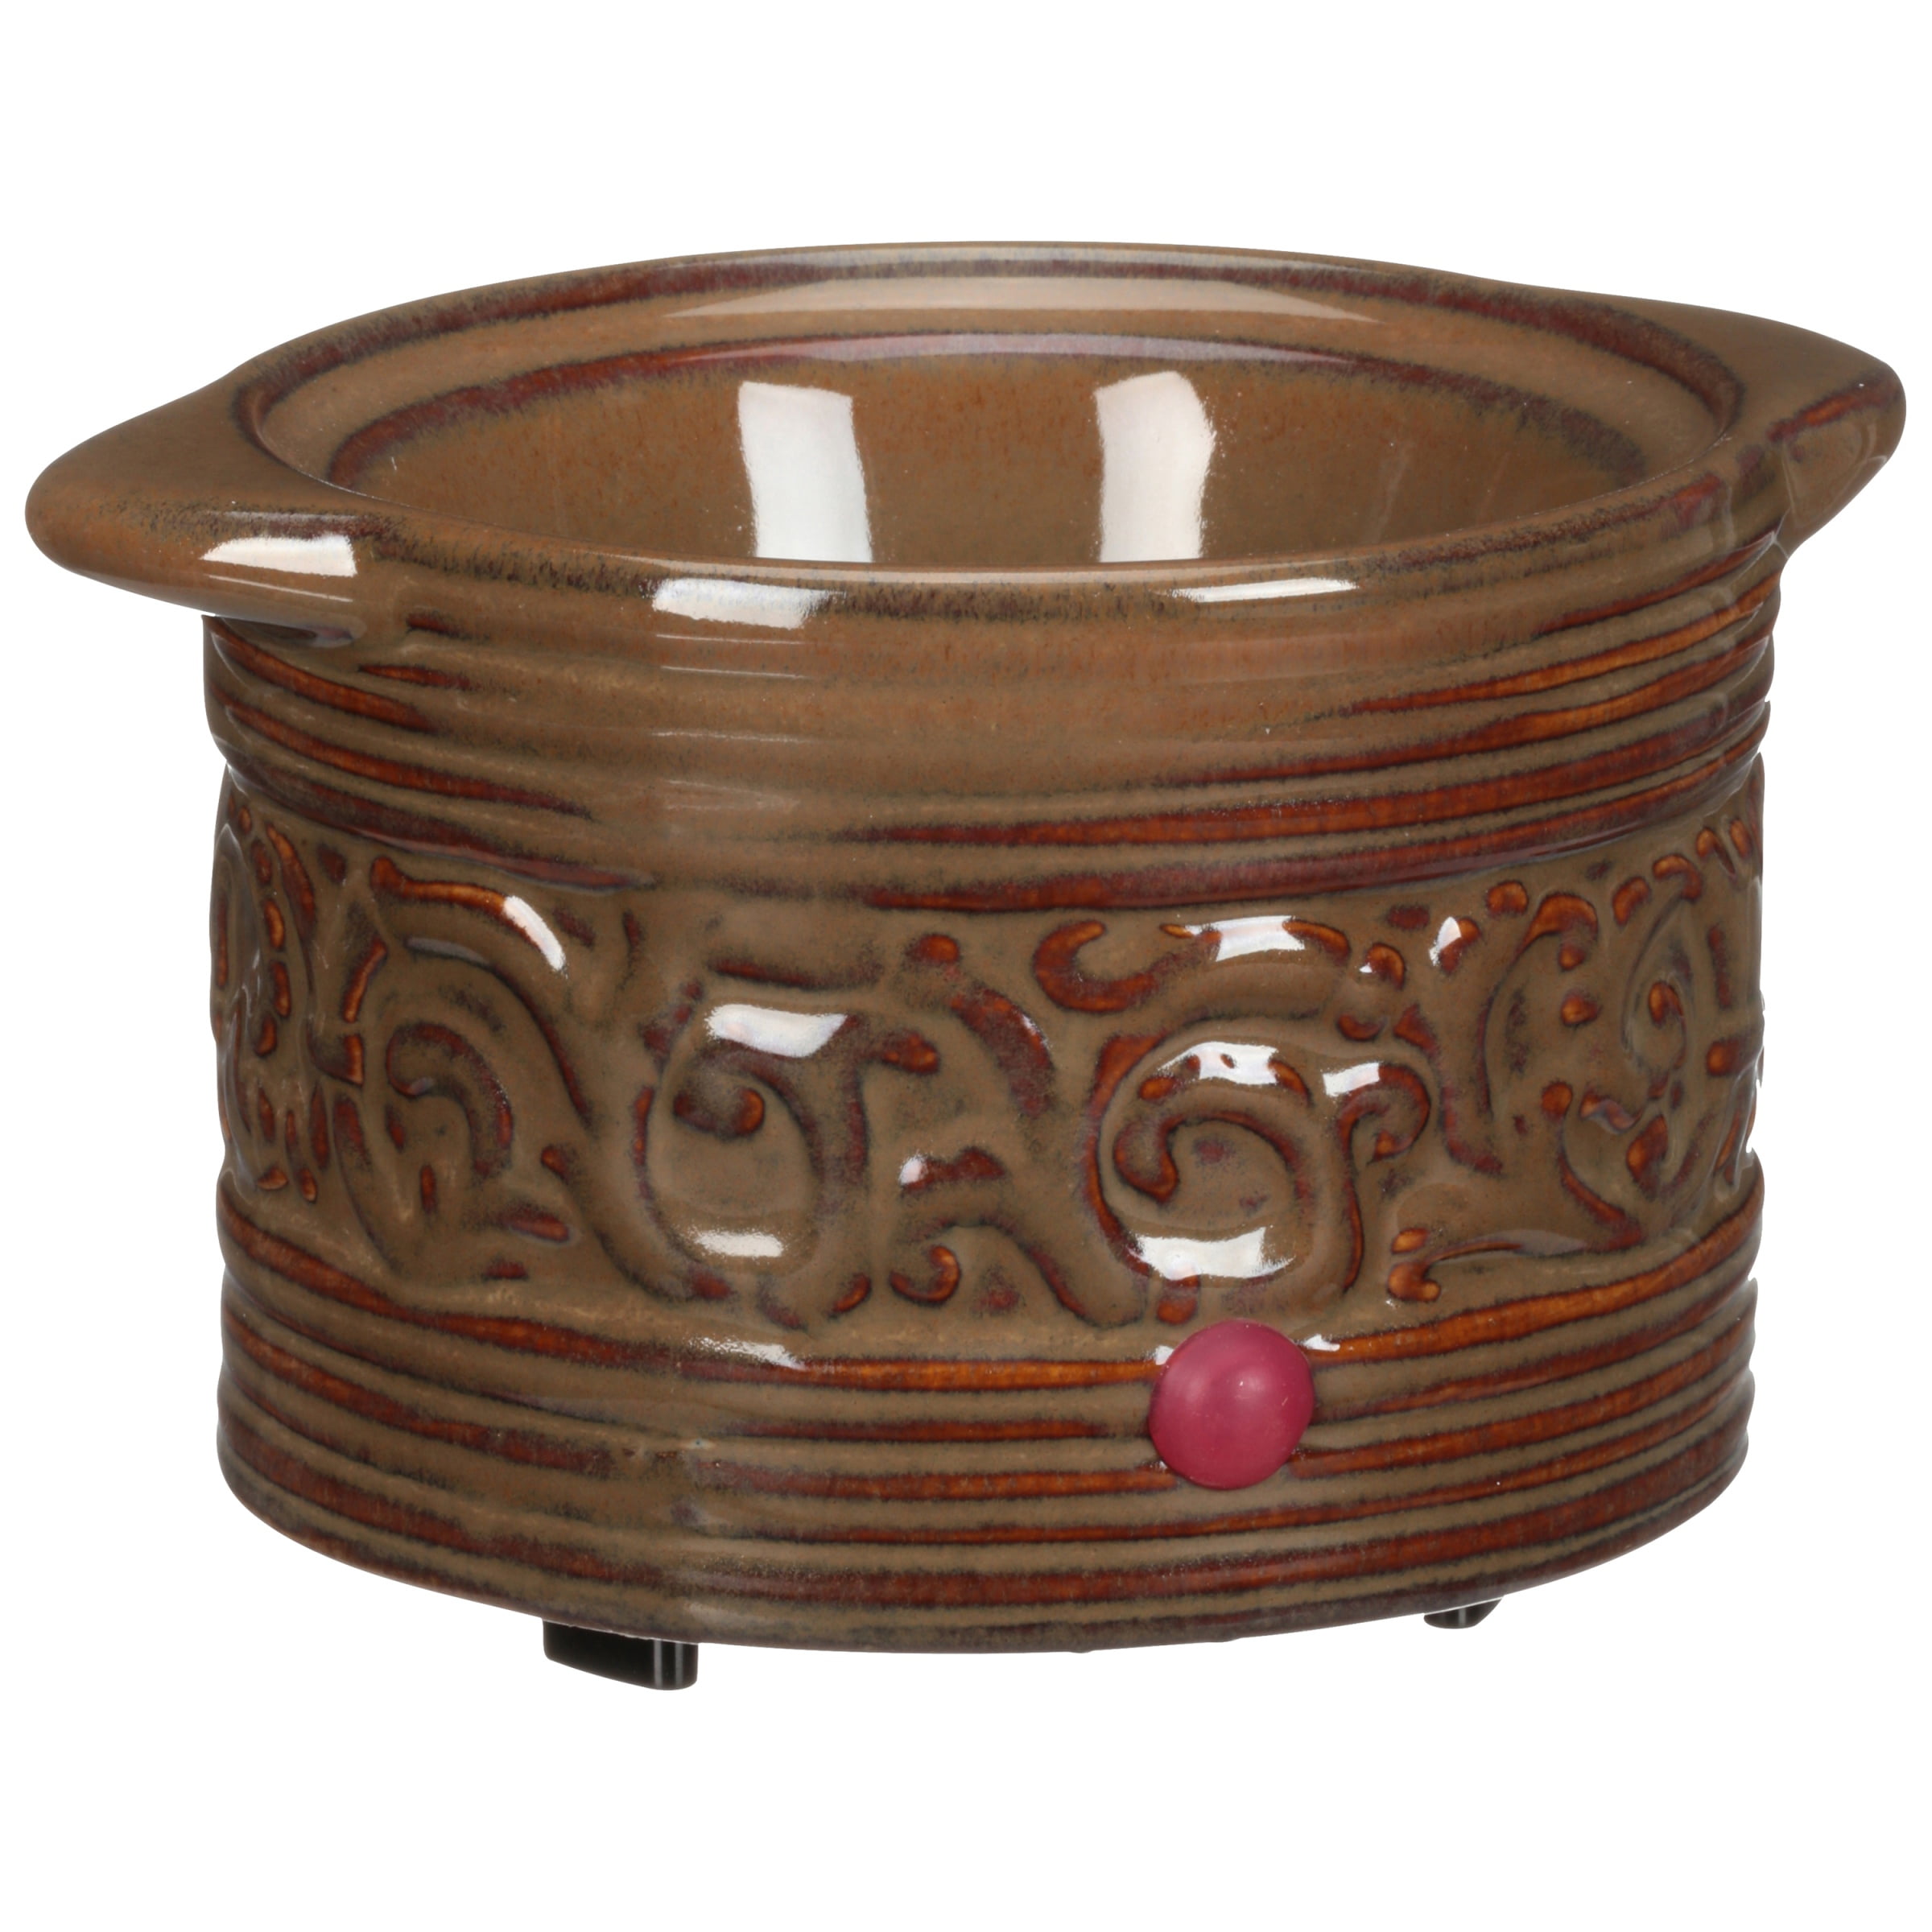 Buy Hosley's Red Electric Potpourri Warmer, 4.5 D x 5.5 High